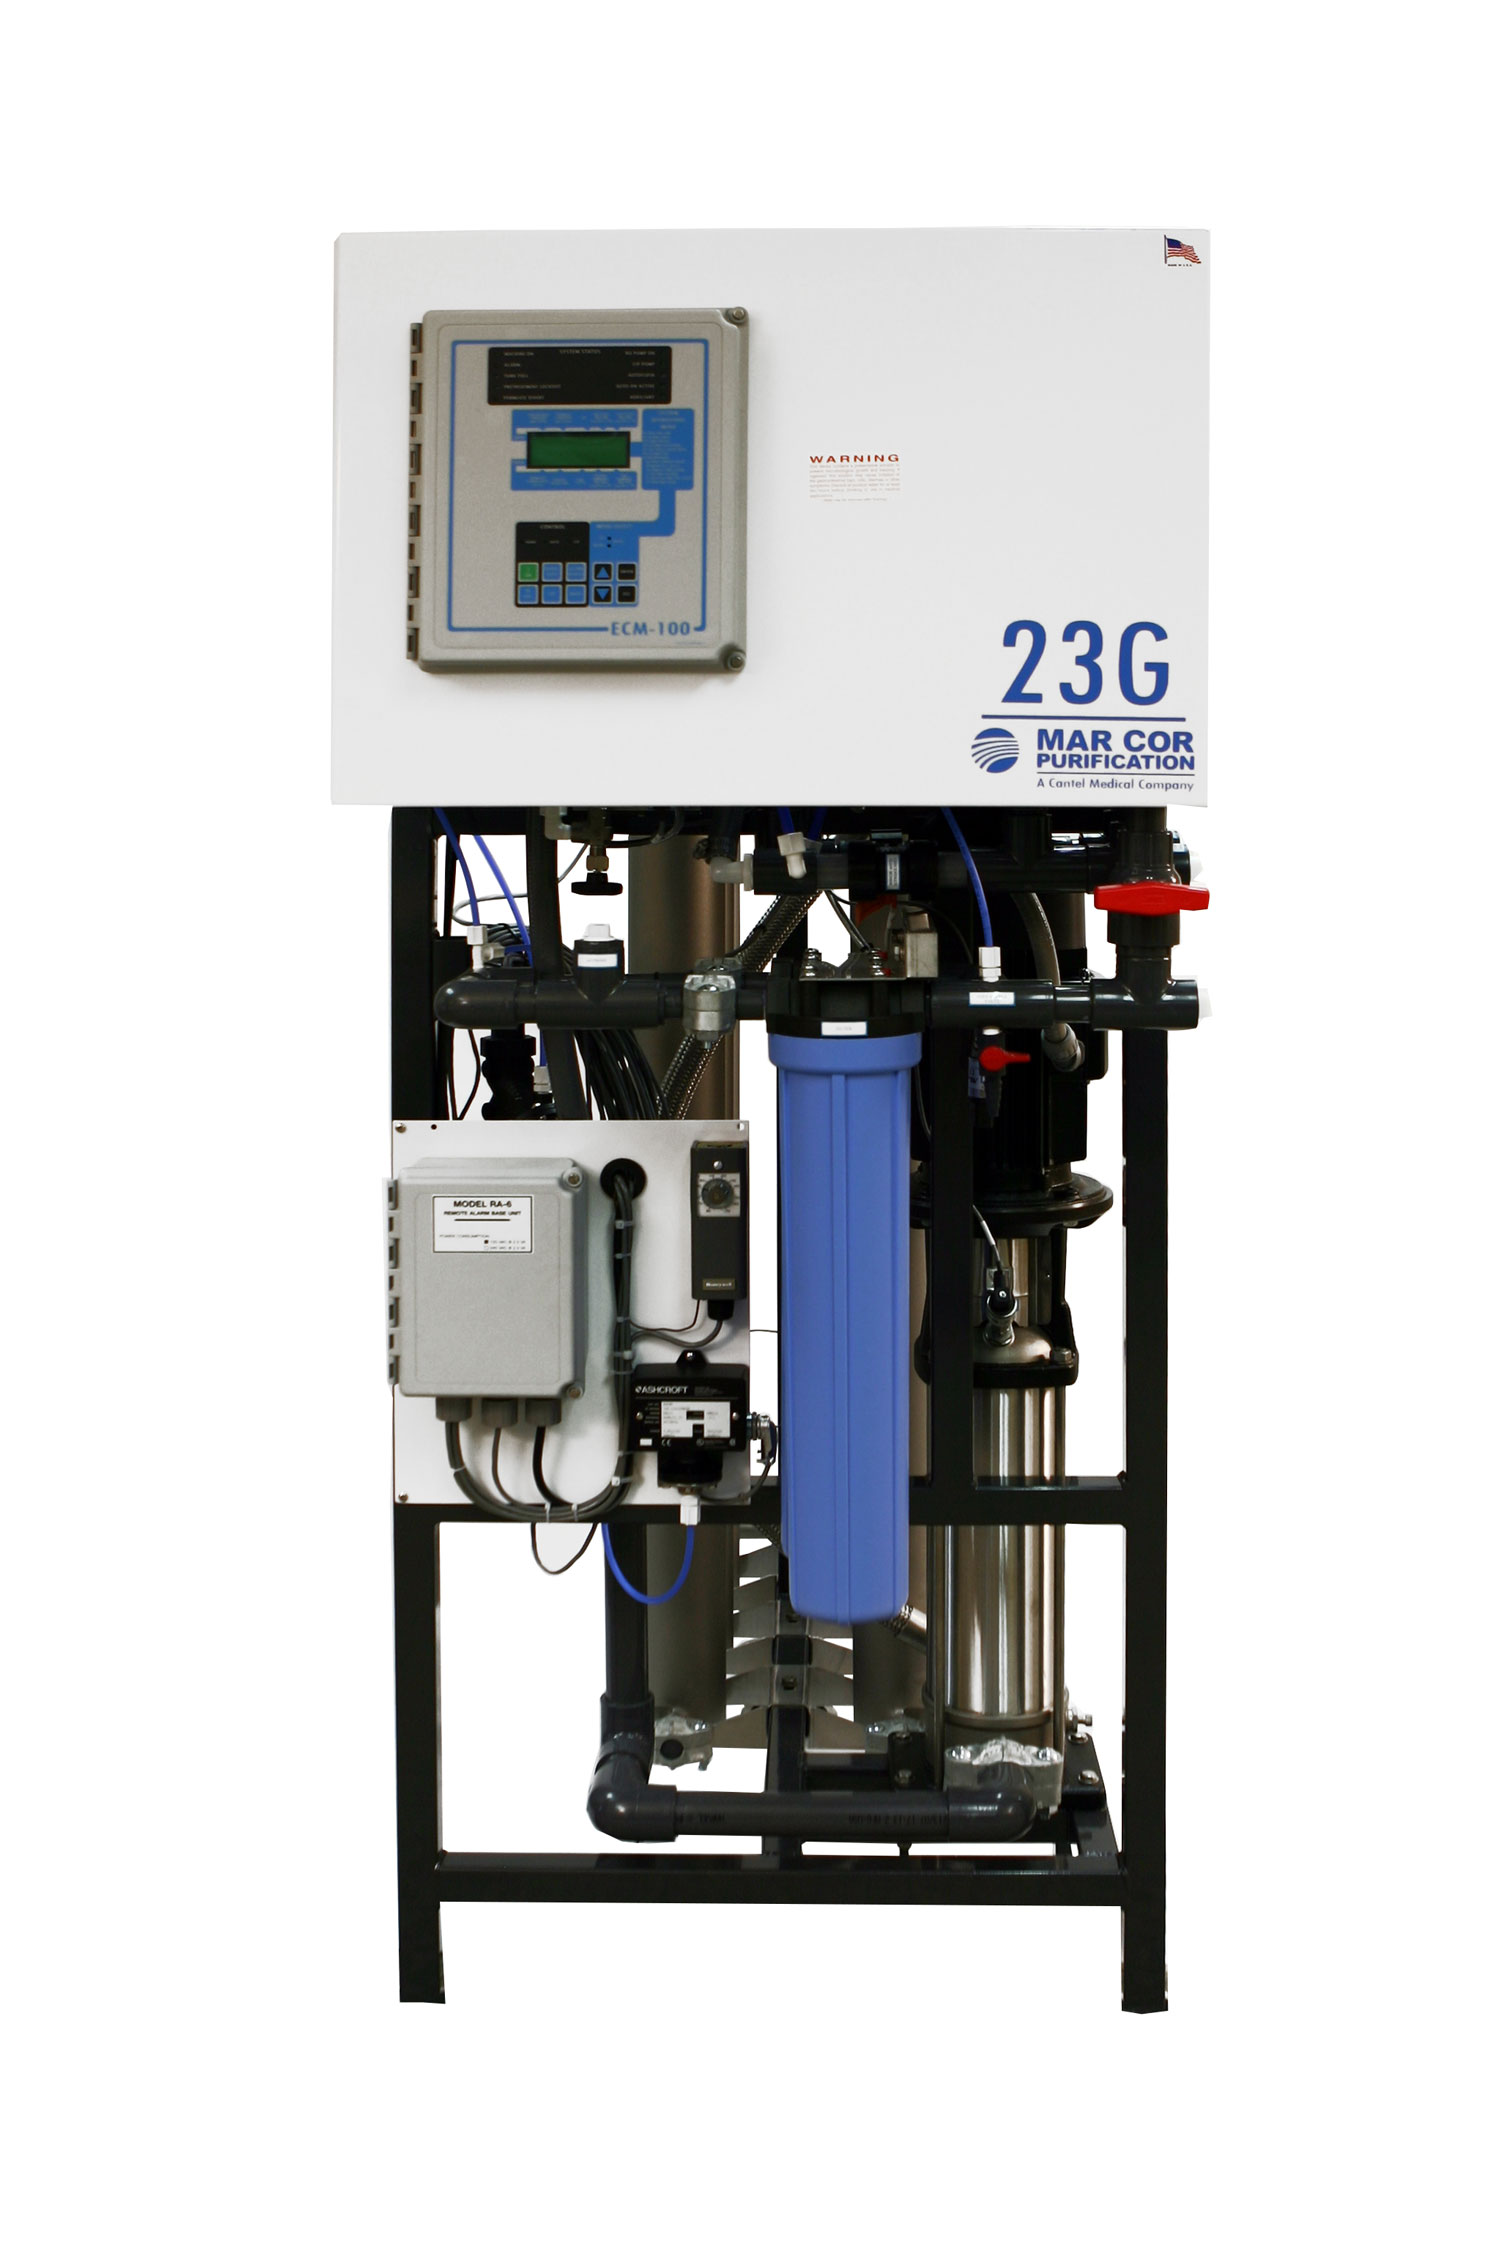 23G Central RO System Mar Cor Water, Filtration, & Disinfection Technologies